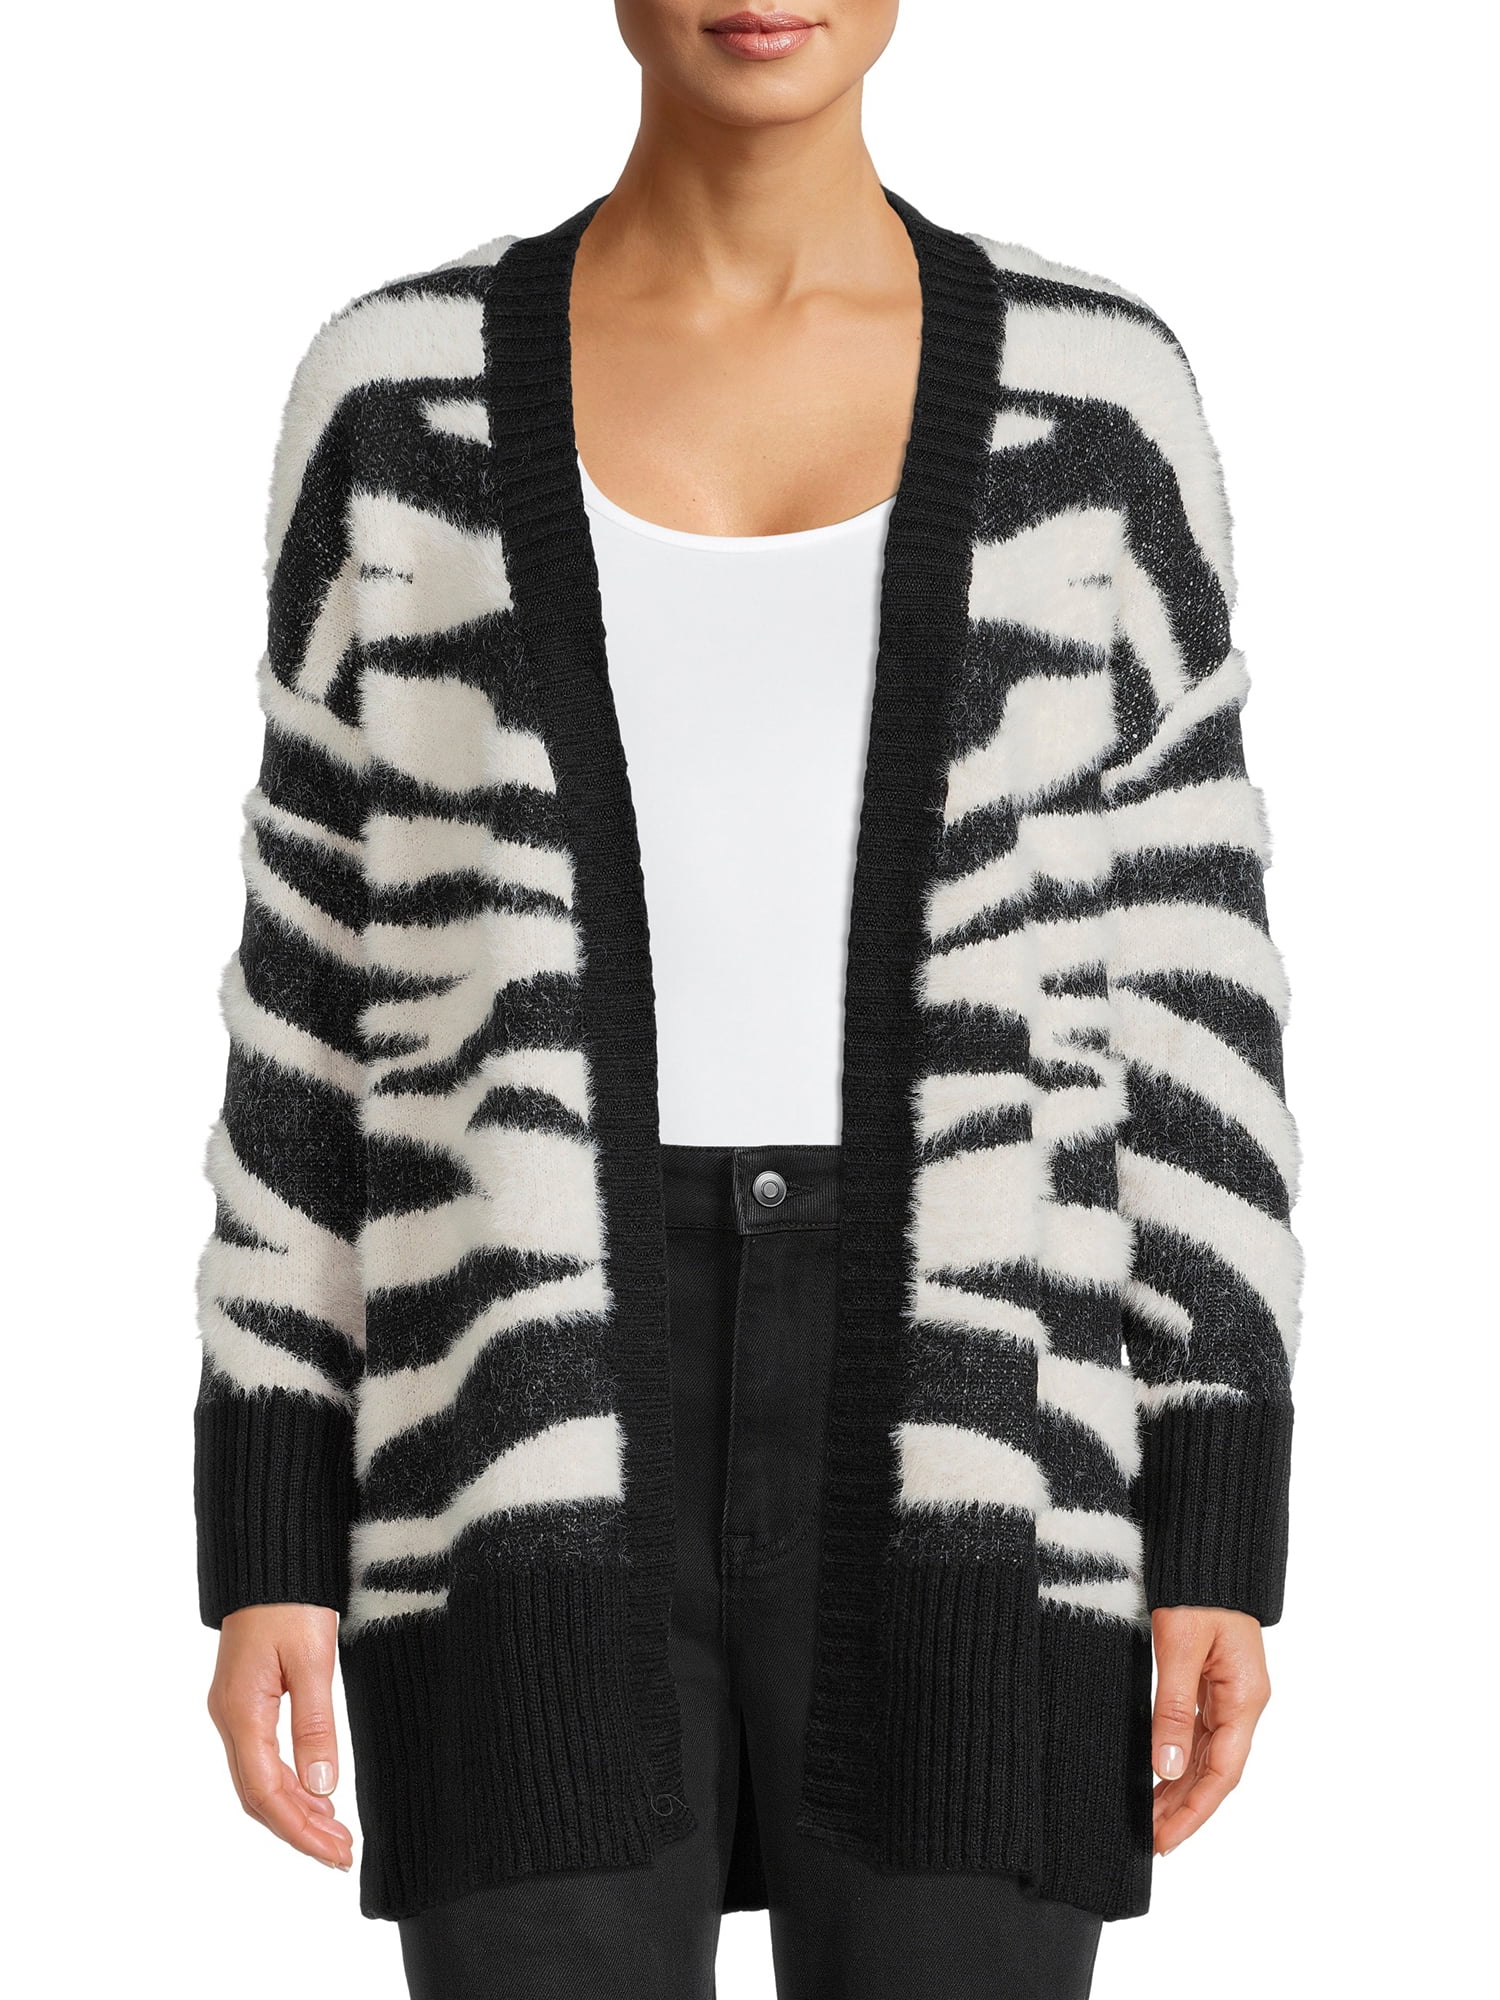 Rossler Selection Cardigan black-white allover print business style Fashion Jackets Cardigans 